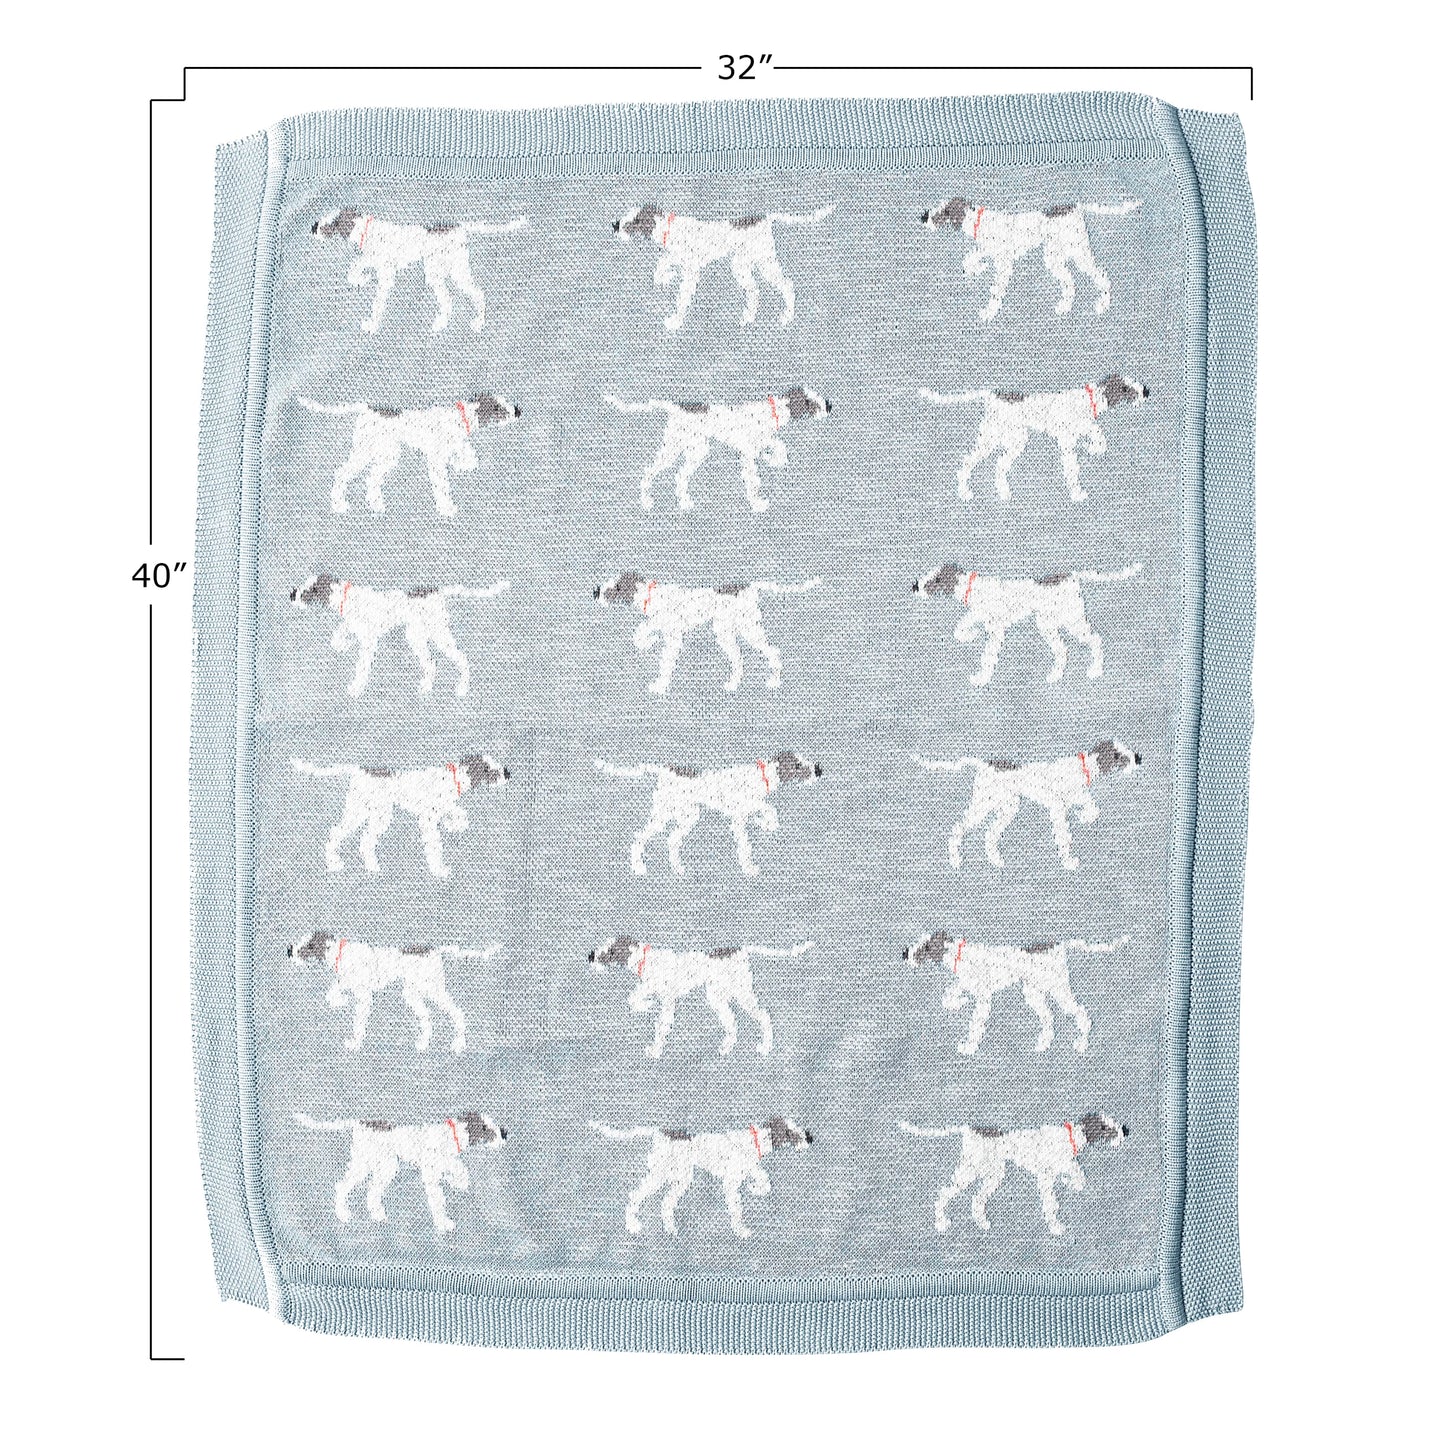 Dog Cotton Knit Baby Blanket Deluxe Boarder